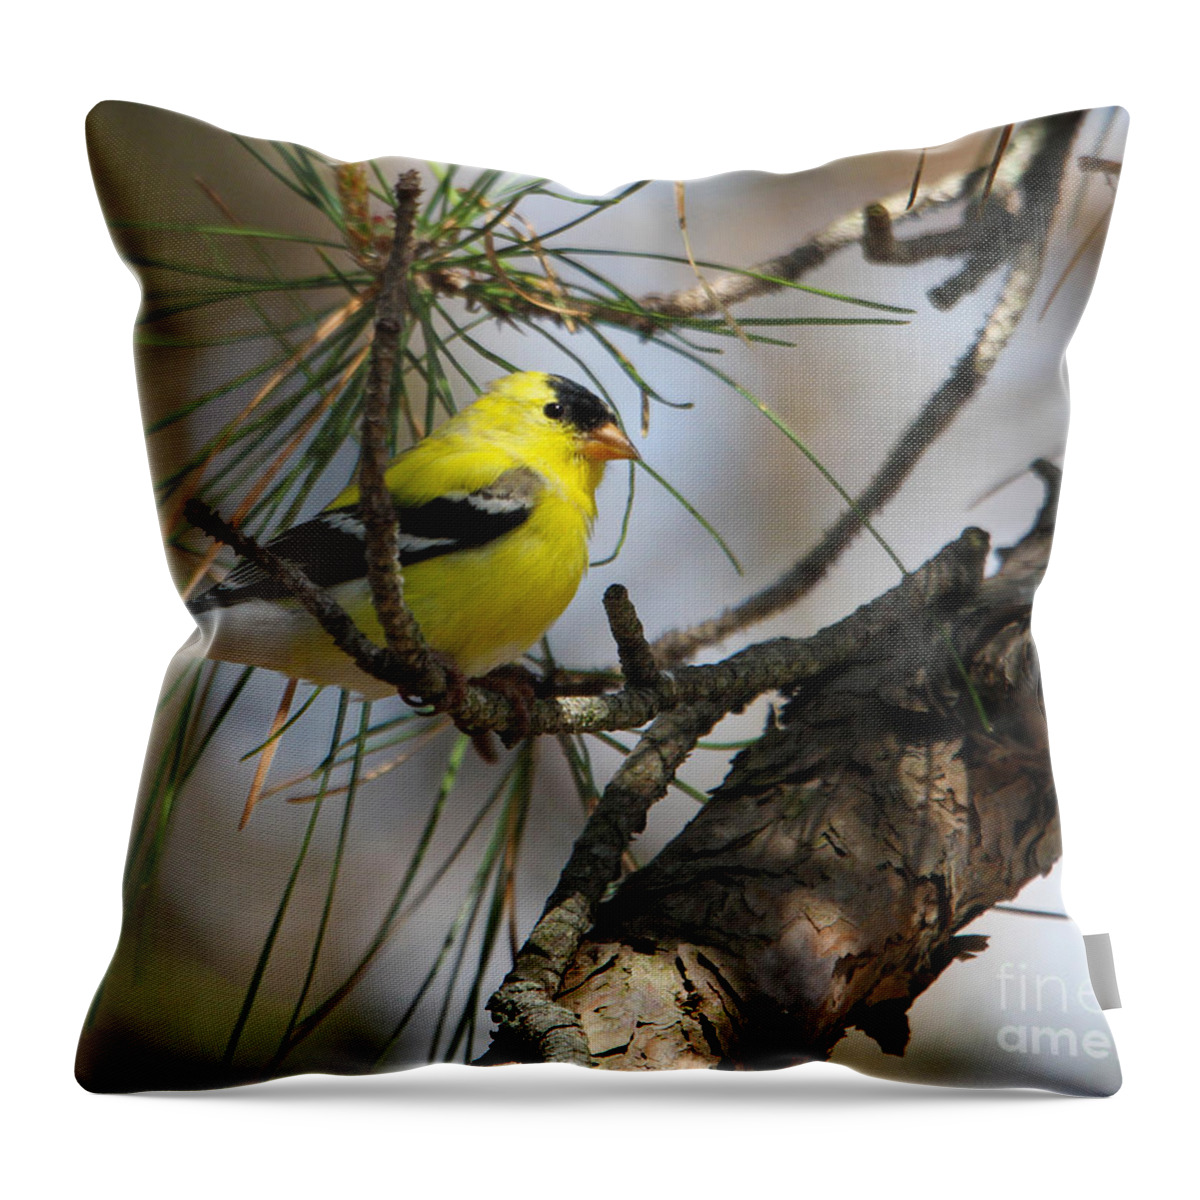 Gold Finch Throw Pillow featuring the photograph Gold Finch by Roger Becker